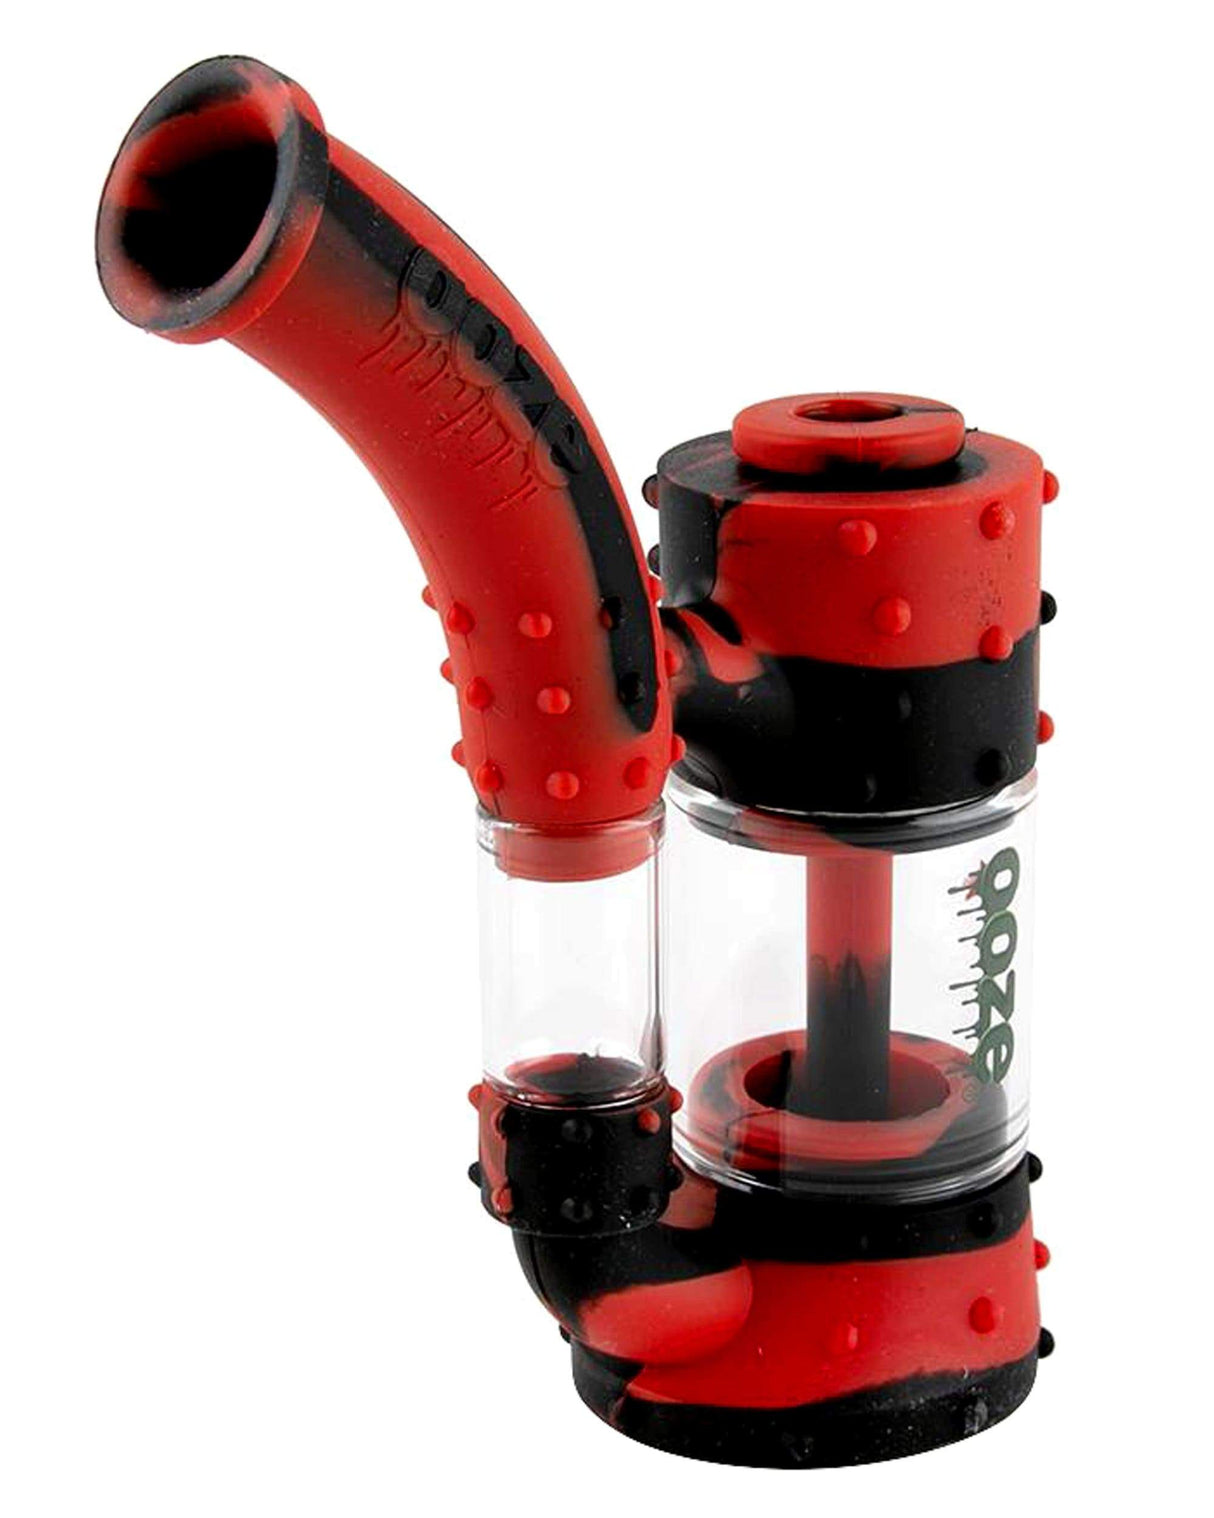 Ooze Stack Silicone Bubbler in Black and Red - 7" Sherlock Design with Percolator